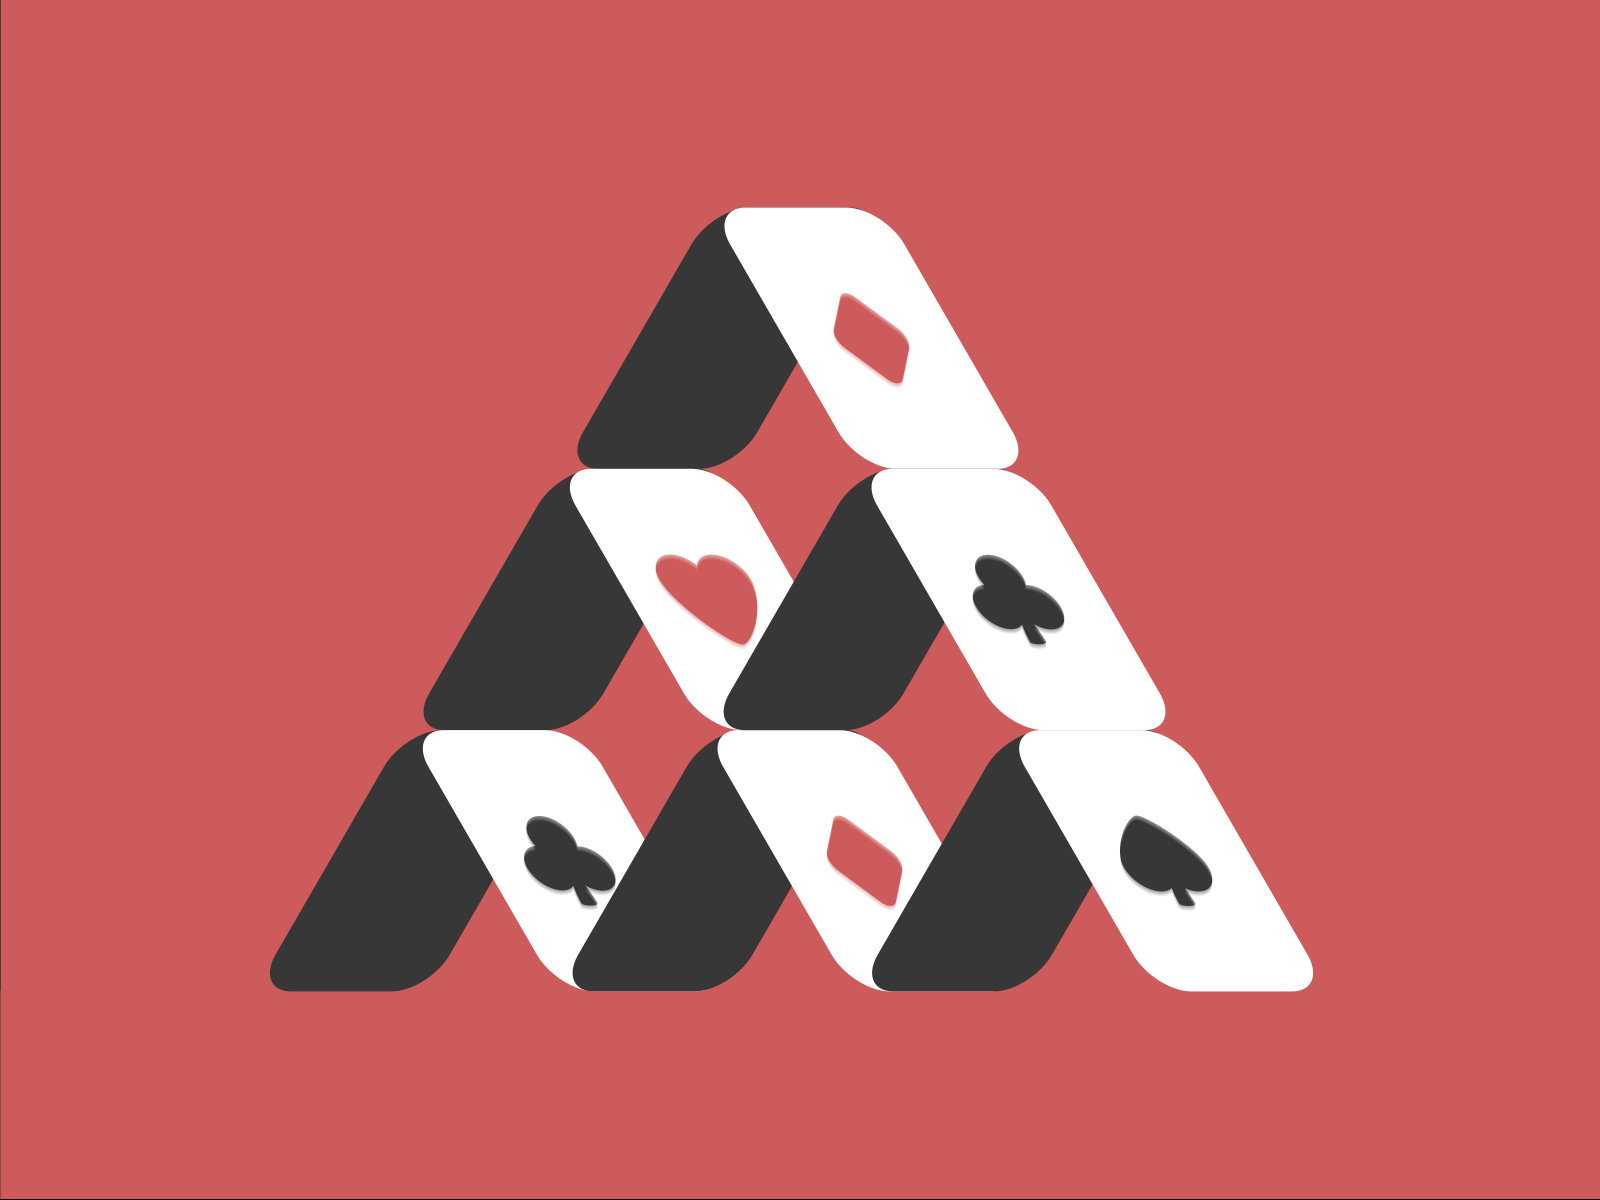 𝕙𝕠𝕦𝕤𝕖 𝕠𝕗 𝕔𝕒𝕣𝕕𝕤 ♠️♥️♦️♣️ ace ace of spades aftereffects animation card animation card game cards deconstructed dribbble dribbble best shot full house gif hearts house of cards illustration playing card spades weekly challenge weekly warm-up weeklywarmup